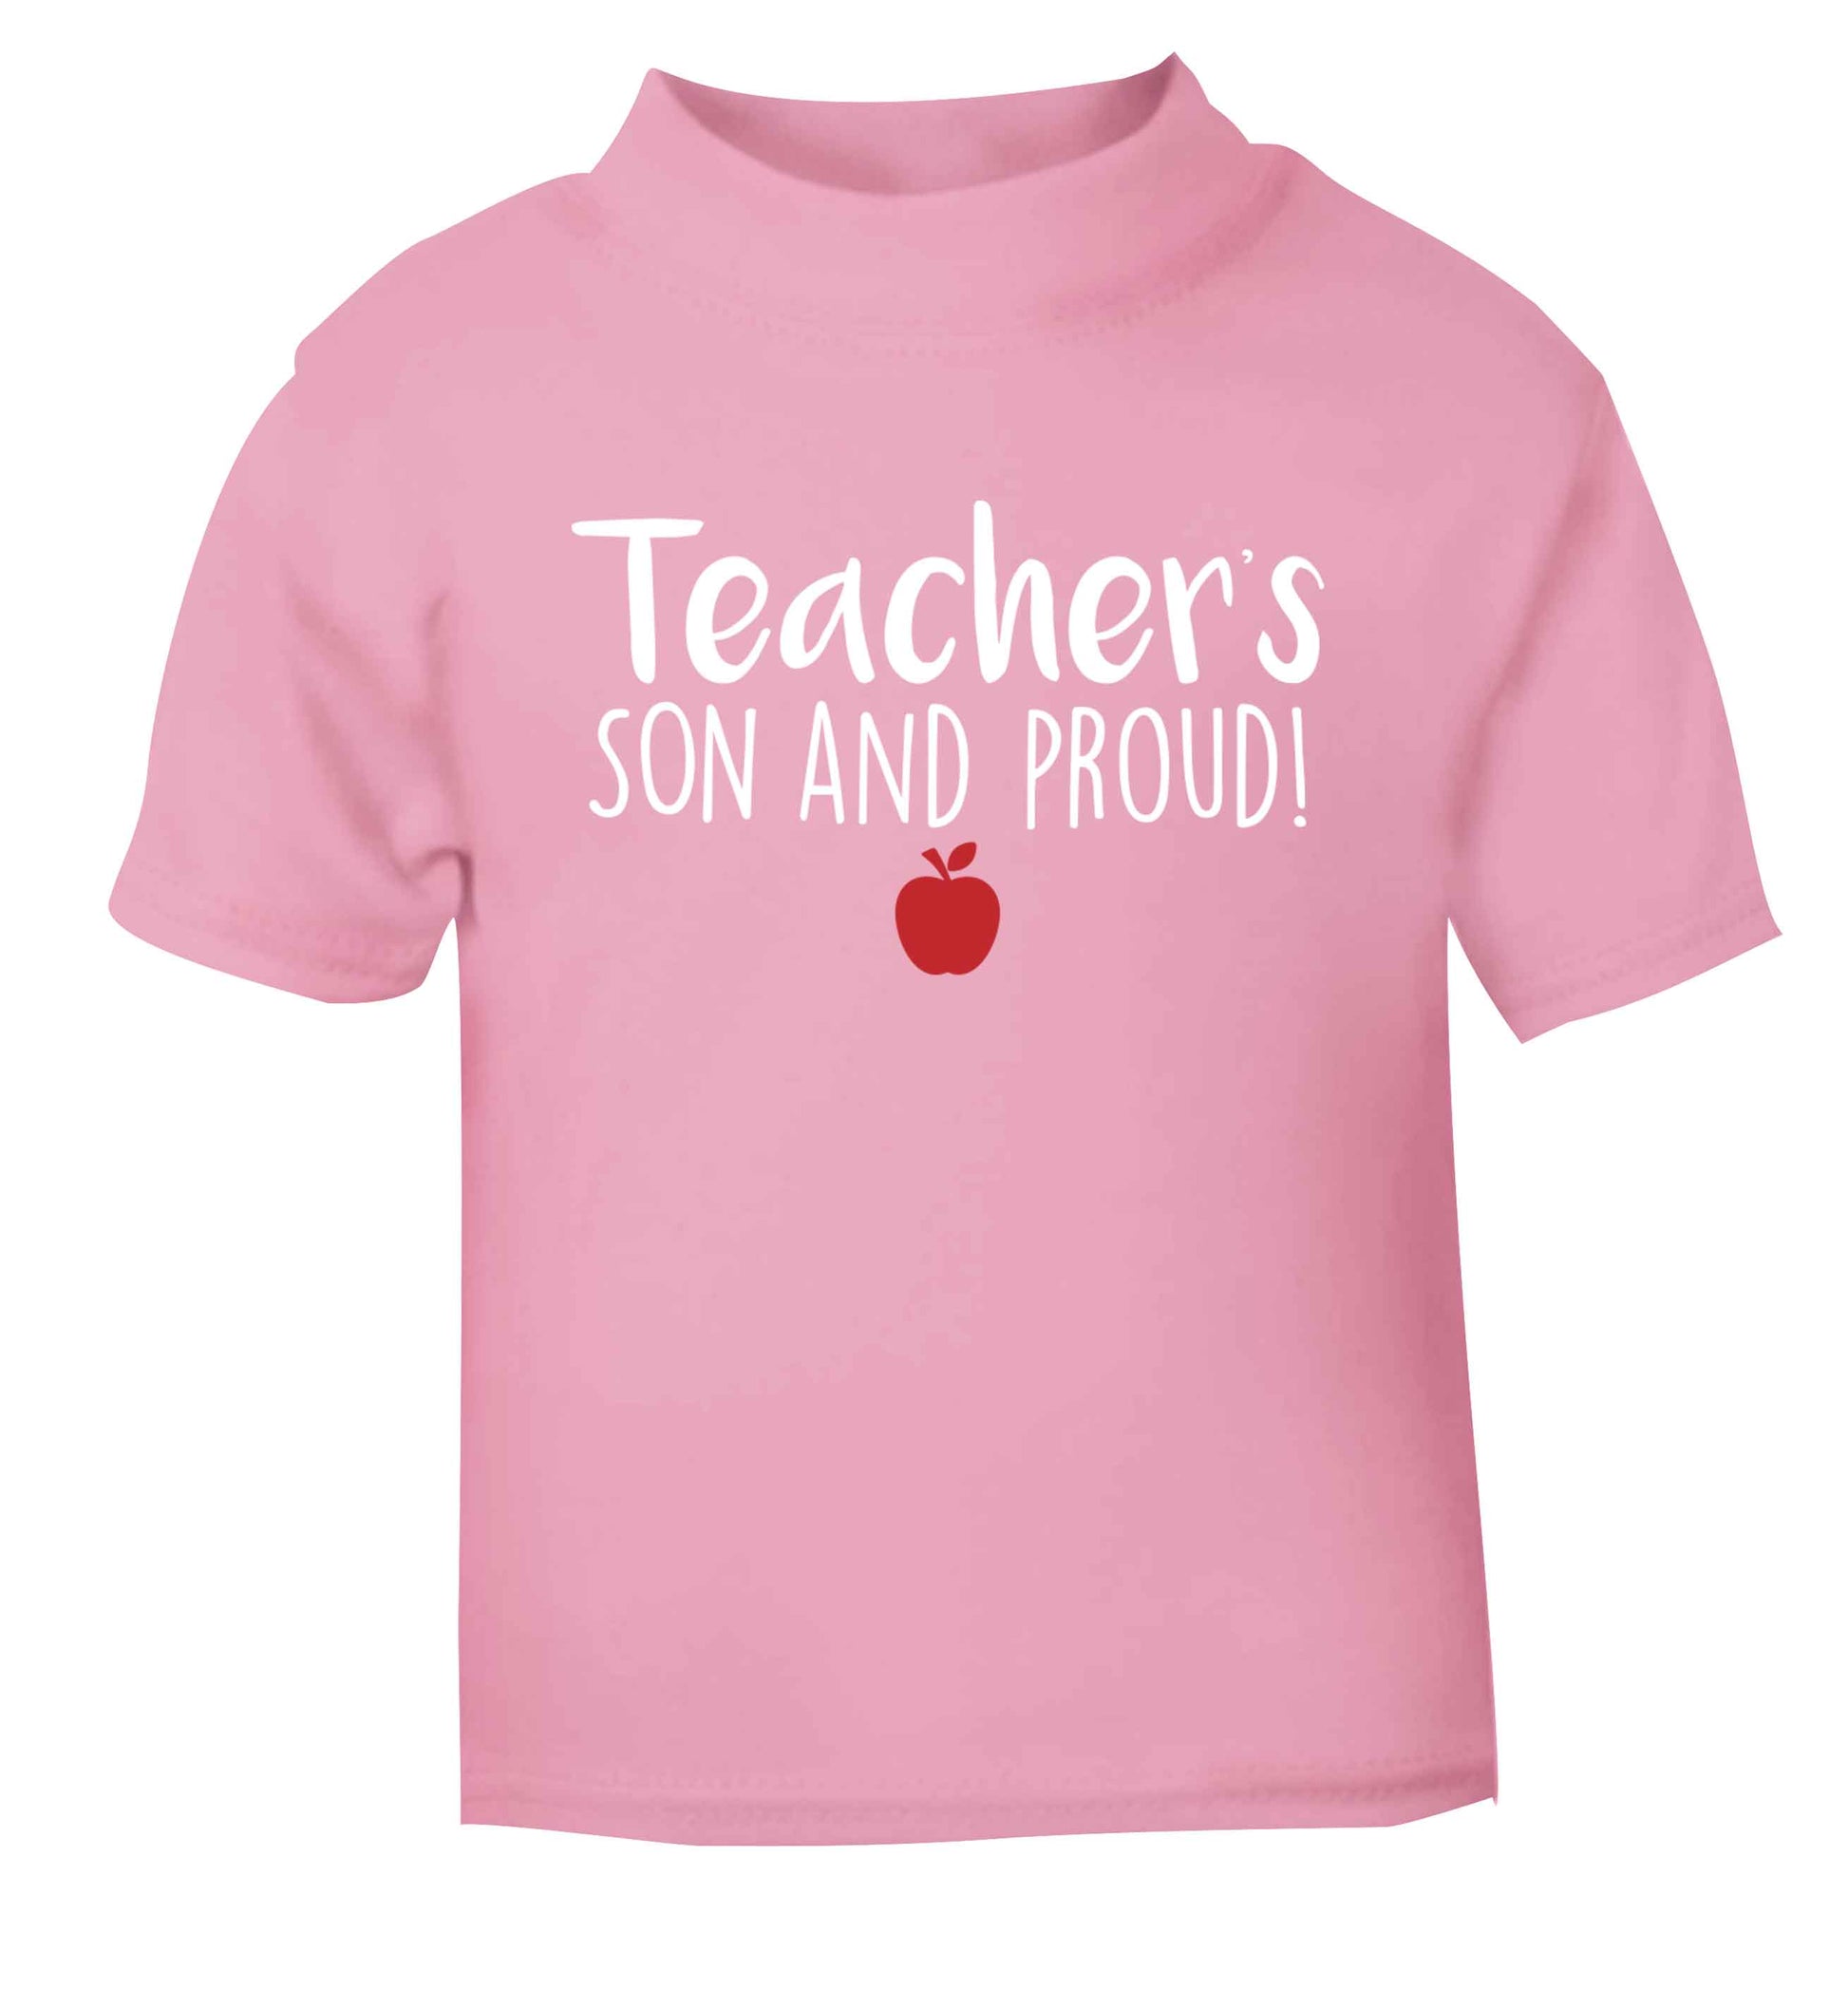 Teachers son and proud light pink baby toddler Tshirt 2 Years